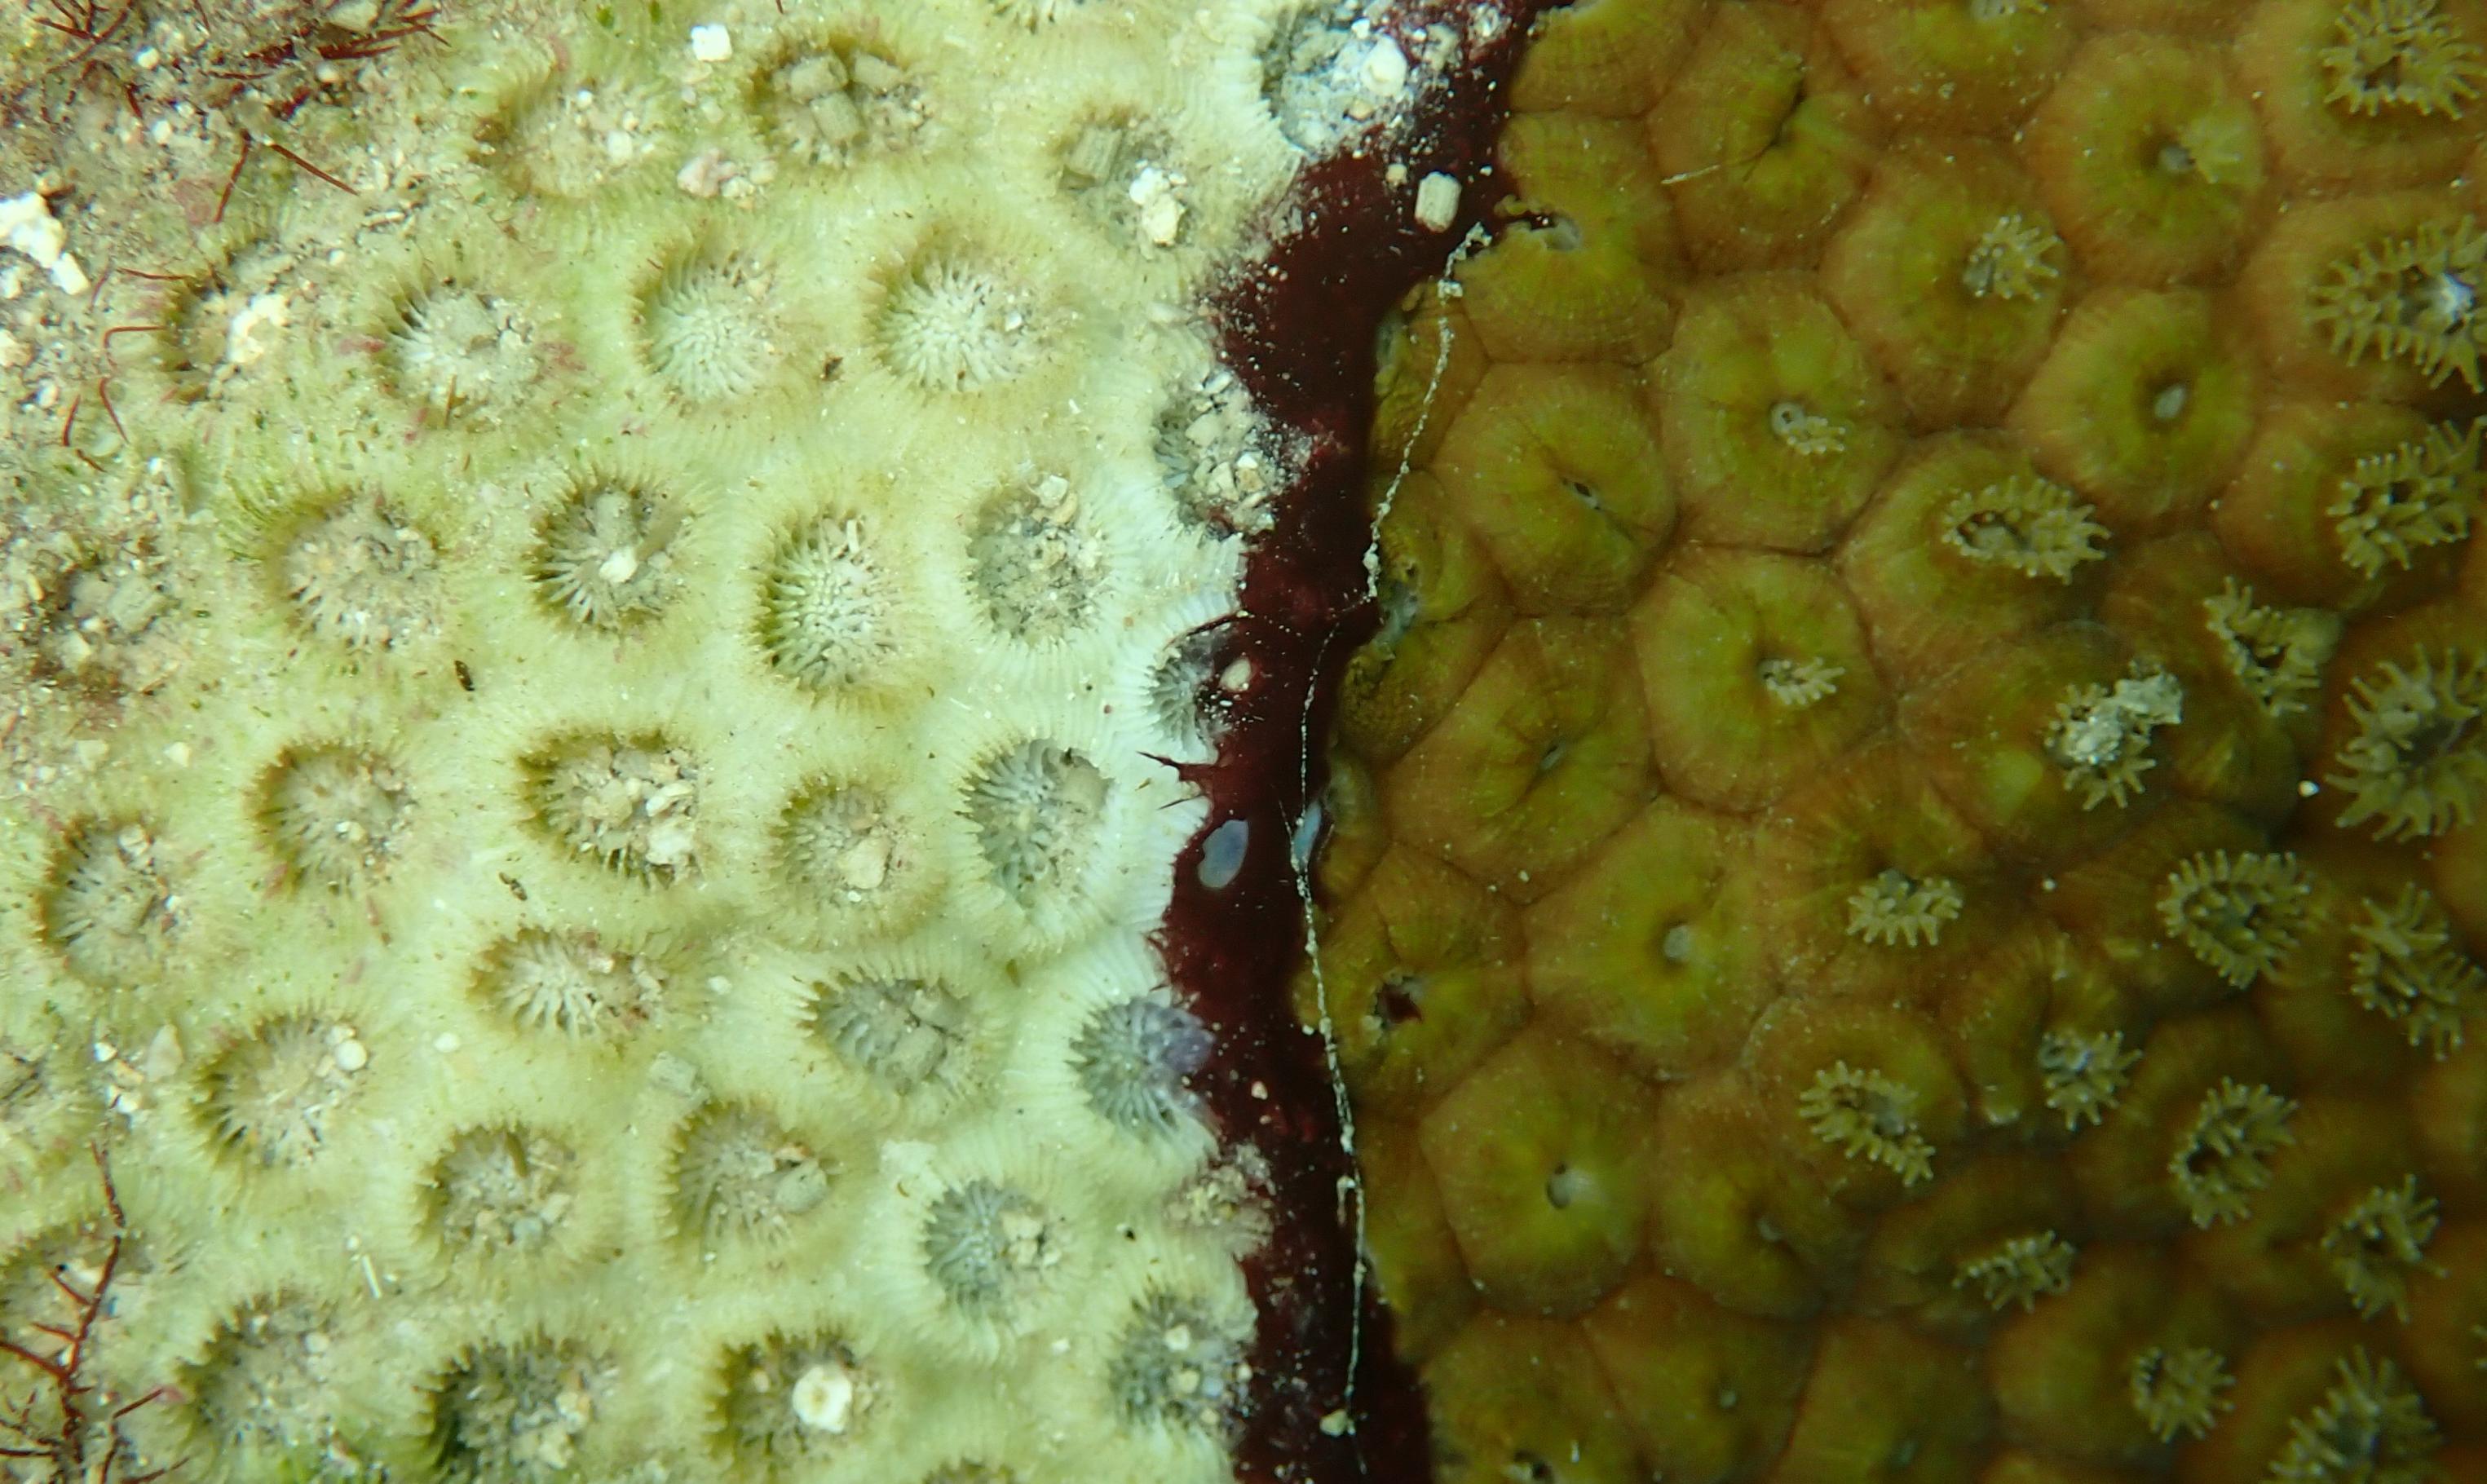 Black band disease on a stony coral